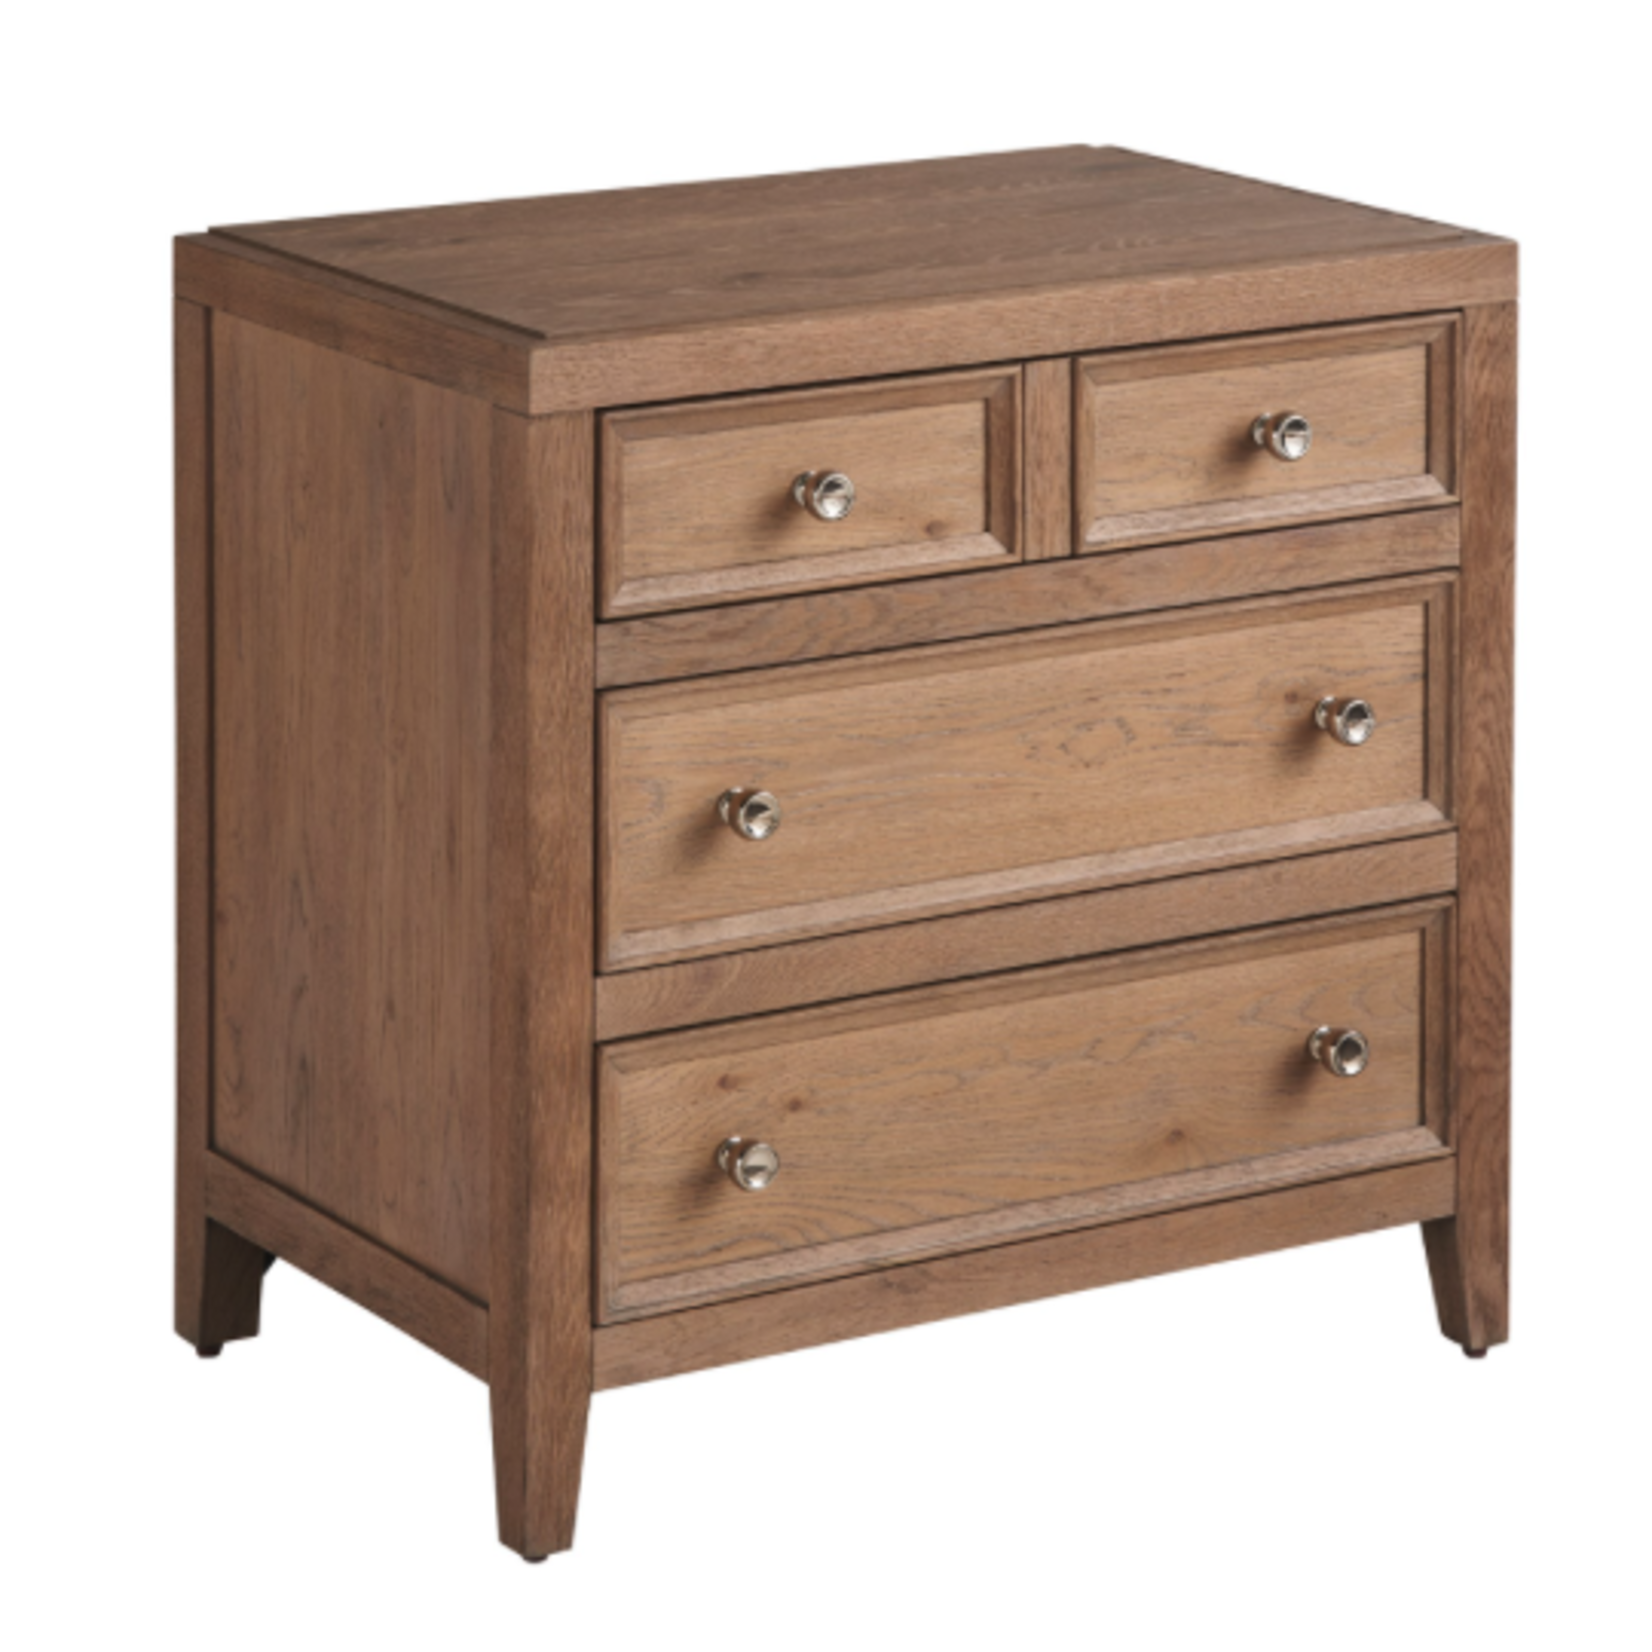 Outside The Box 28x18x28 Weekender Sand Dune 4 Drawer Nightstand